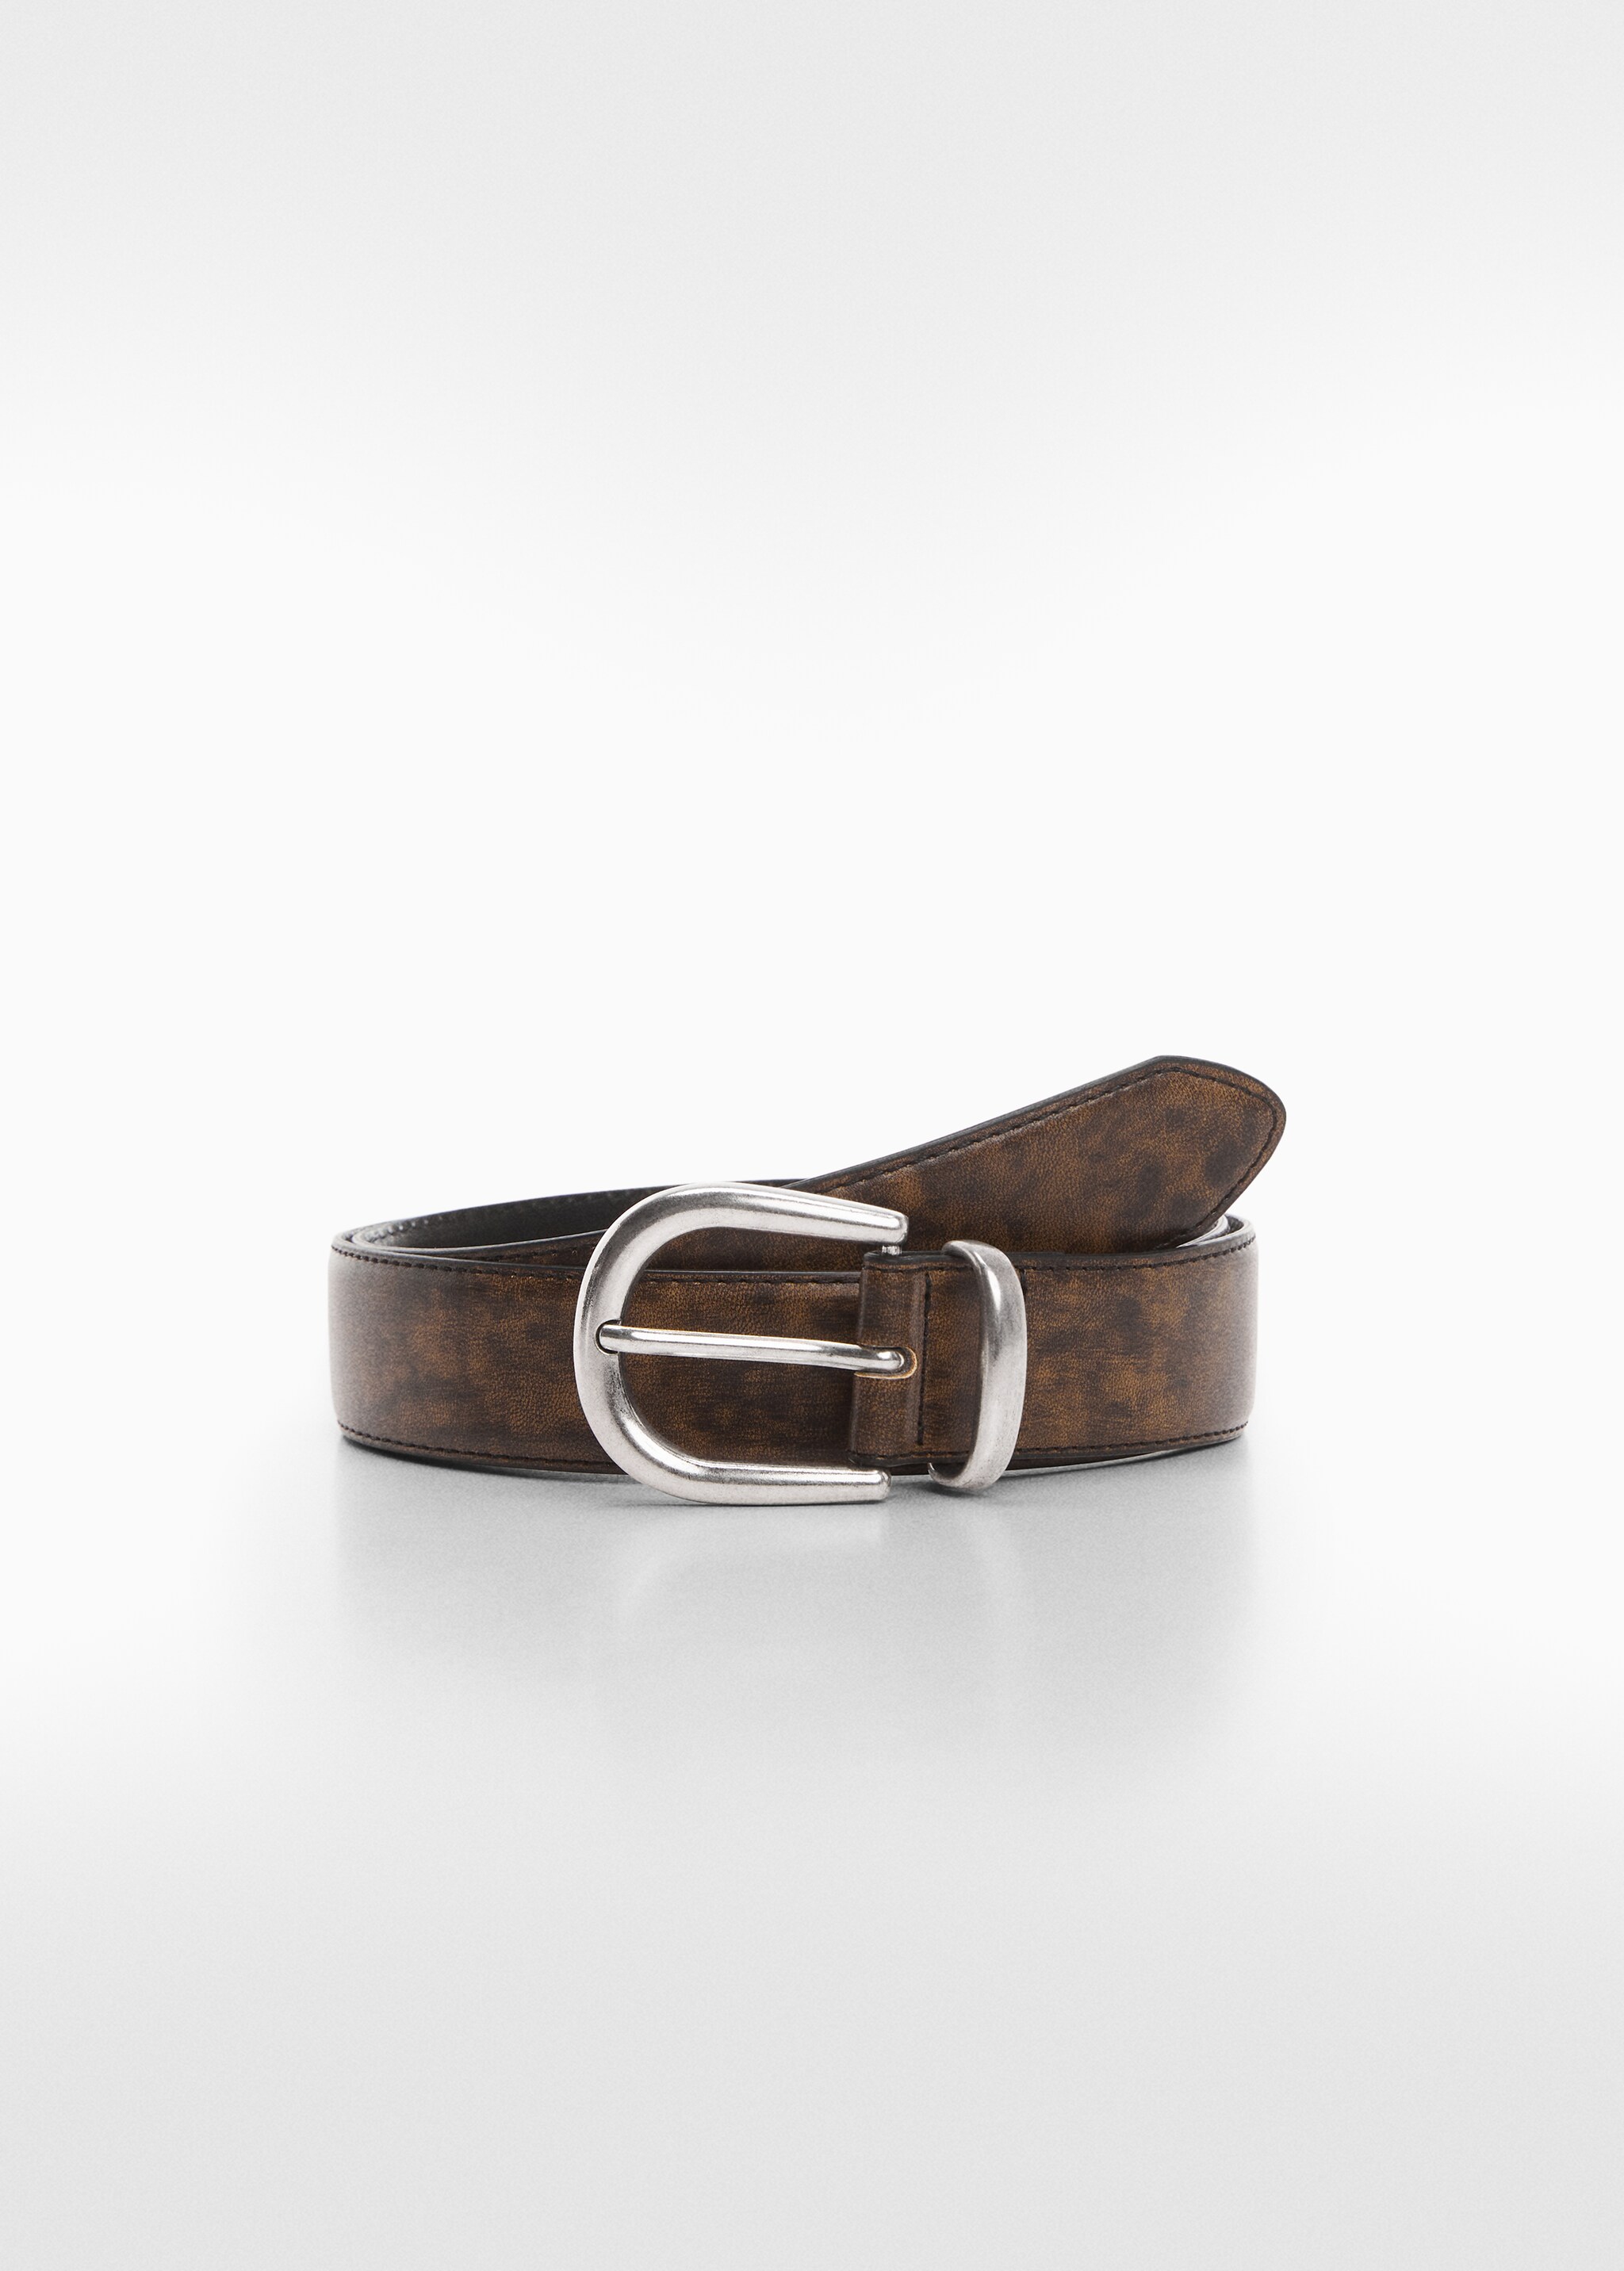 Faux-leather belt - Article without model